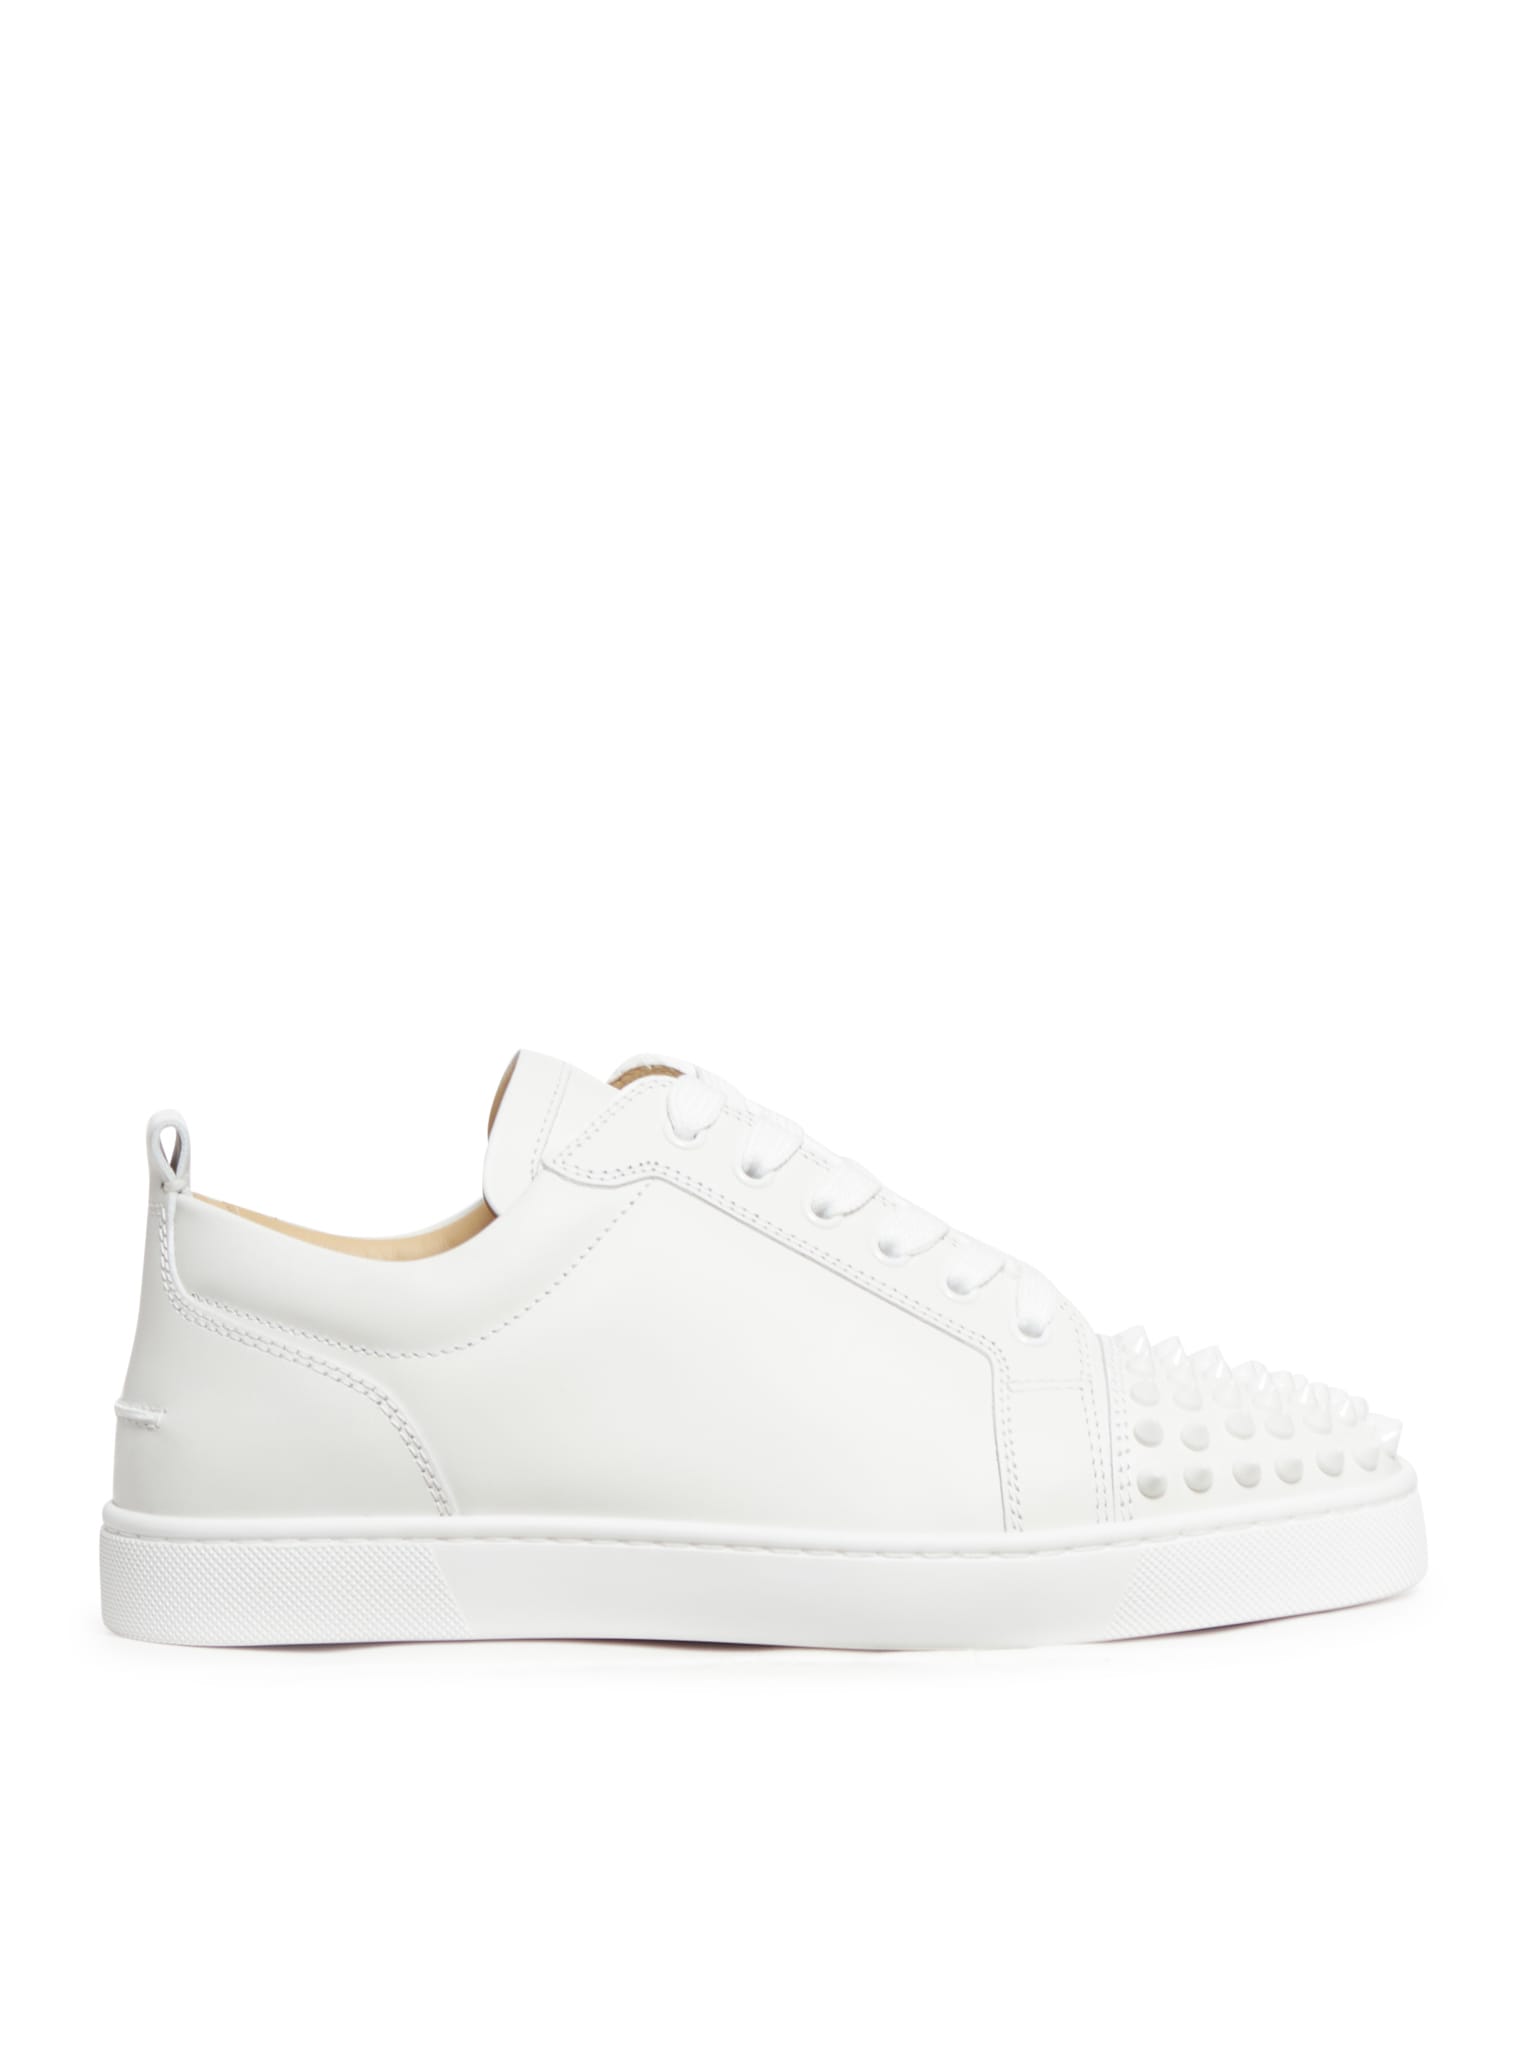 Shop Christian Louboutin Louis Junior Spikes Flat Calf Ds In White